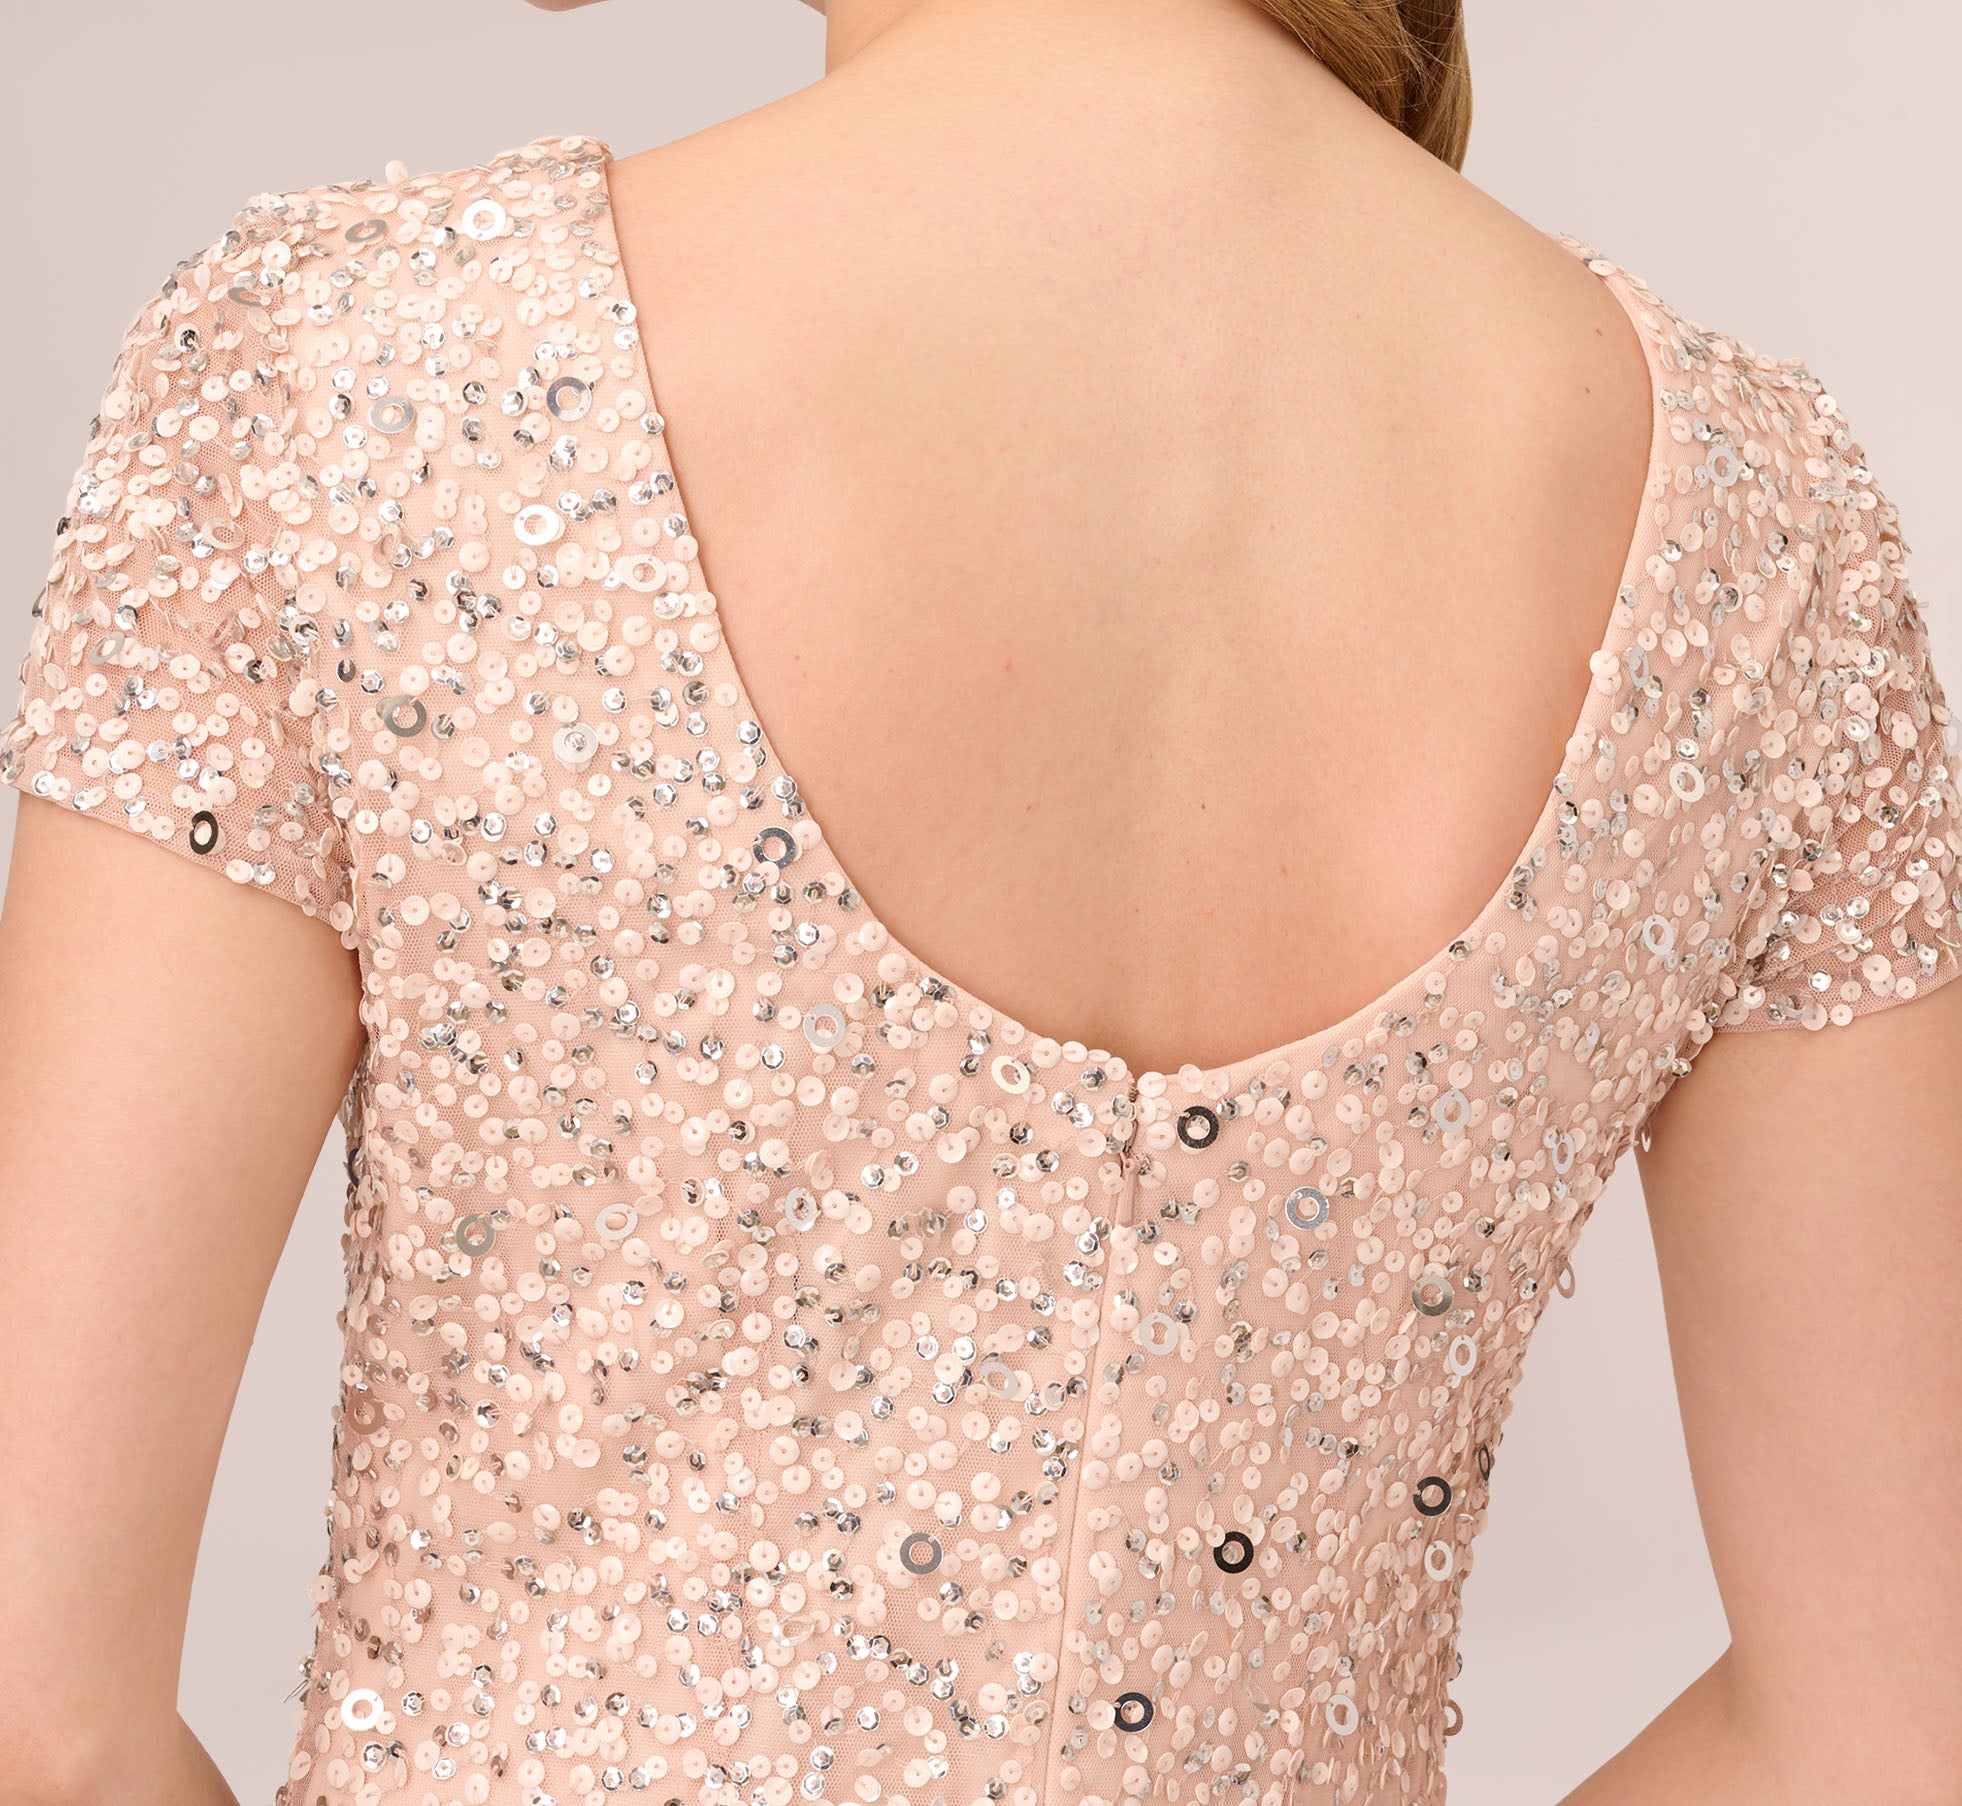 Scoop Back Sequin Gown In Blush | Adrianna Papell